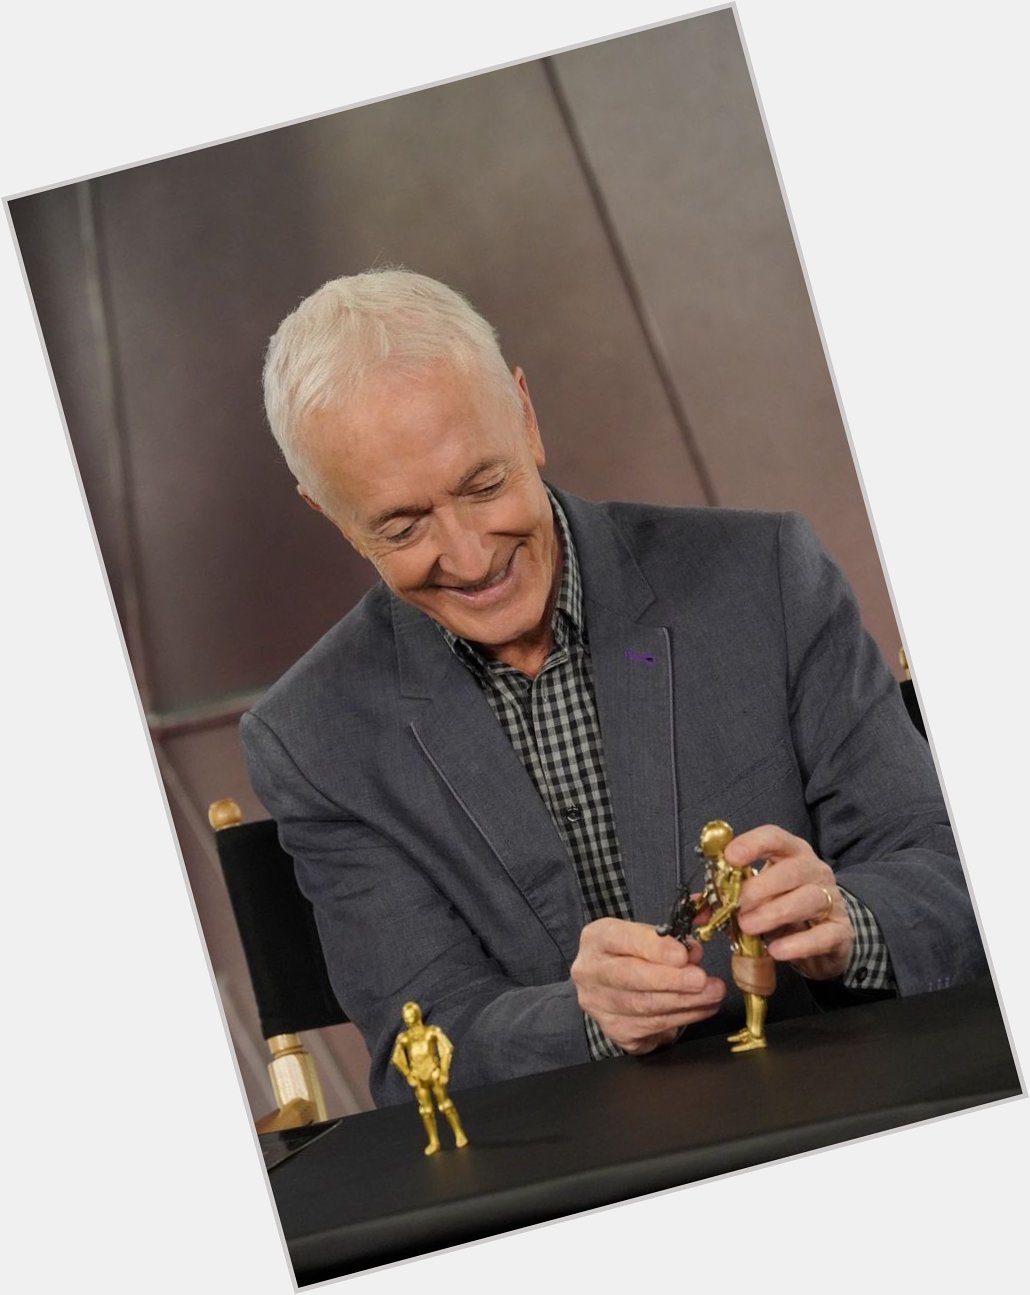 Happy Birthday wishes to the one and only, Anthony Daniels! 